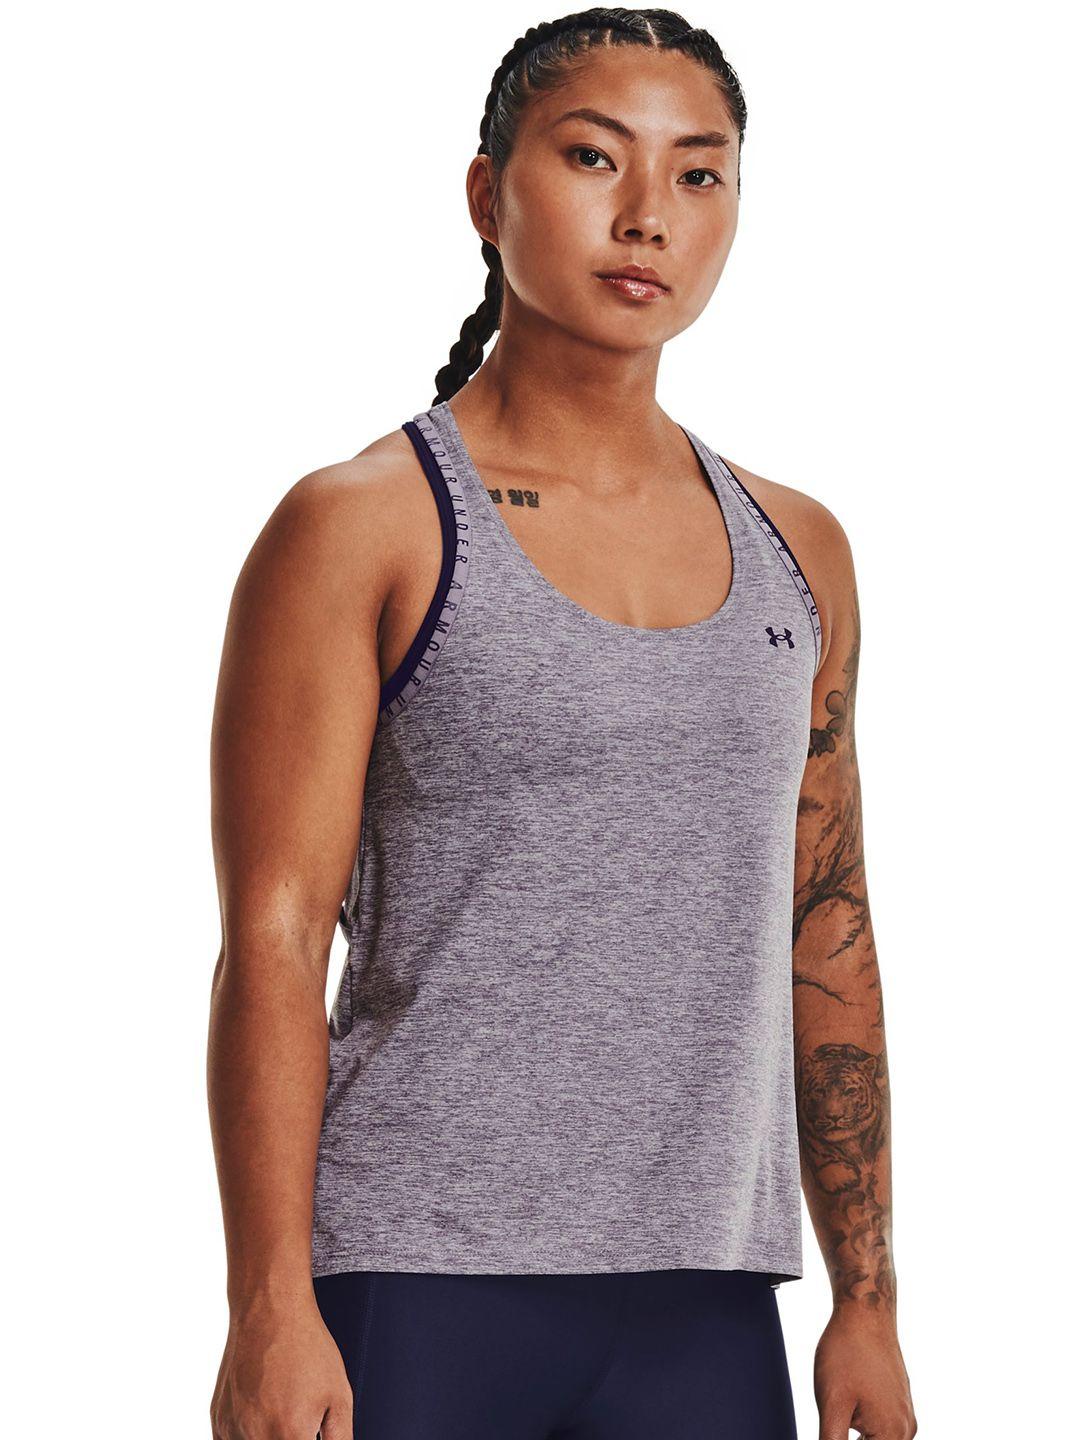 under armour grey self designed sleeveless sports knockout mesh back tank top